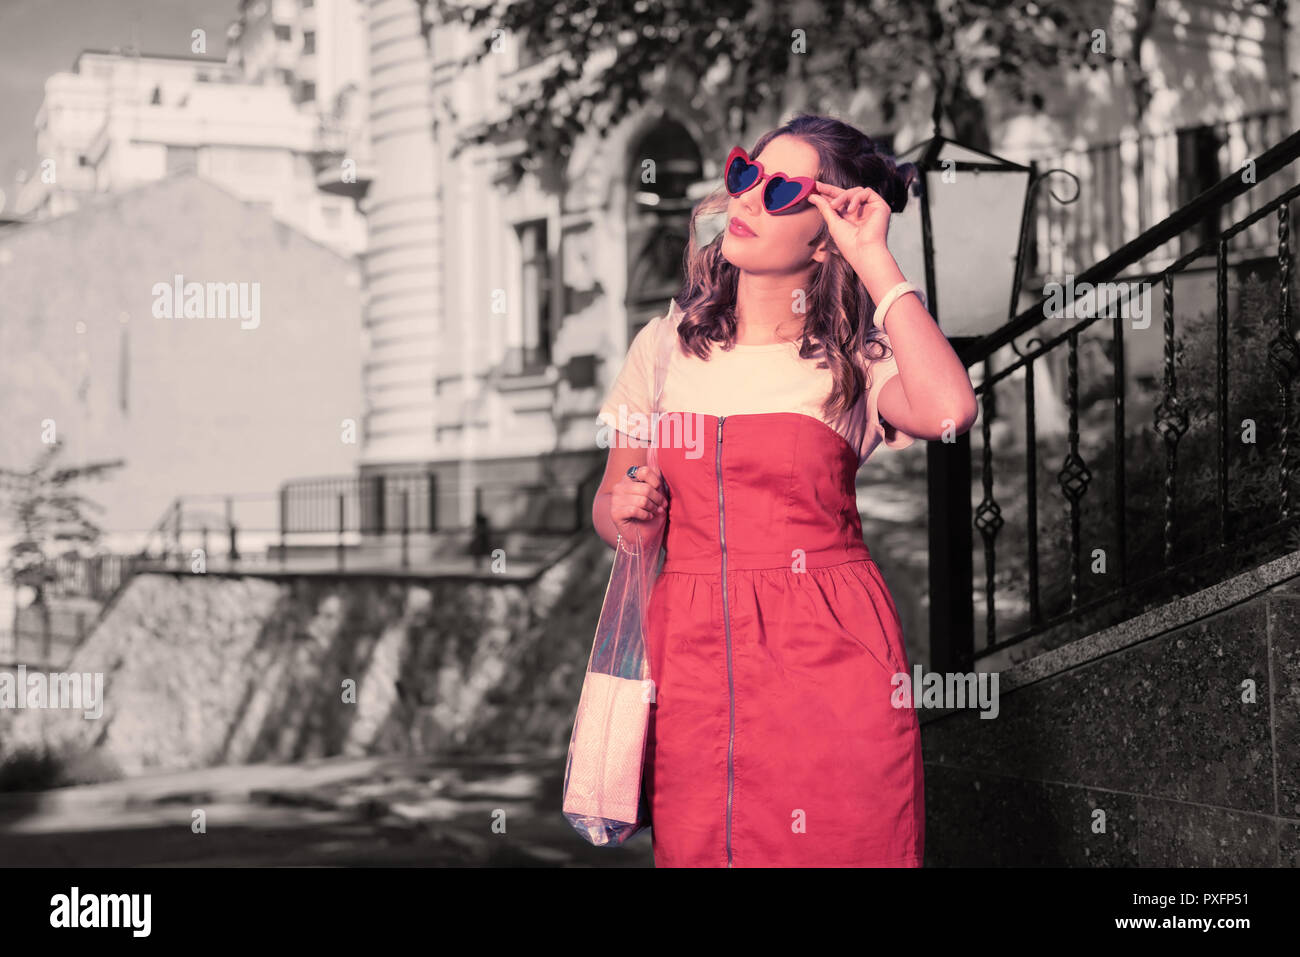 Stylish appealing woman wearing red sunglasses looking at the sky Stock Photo